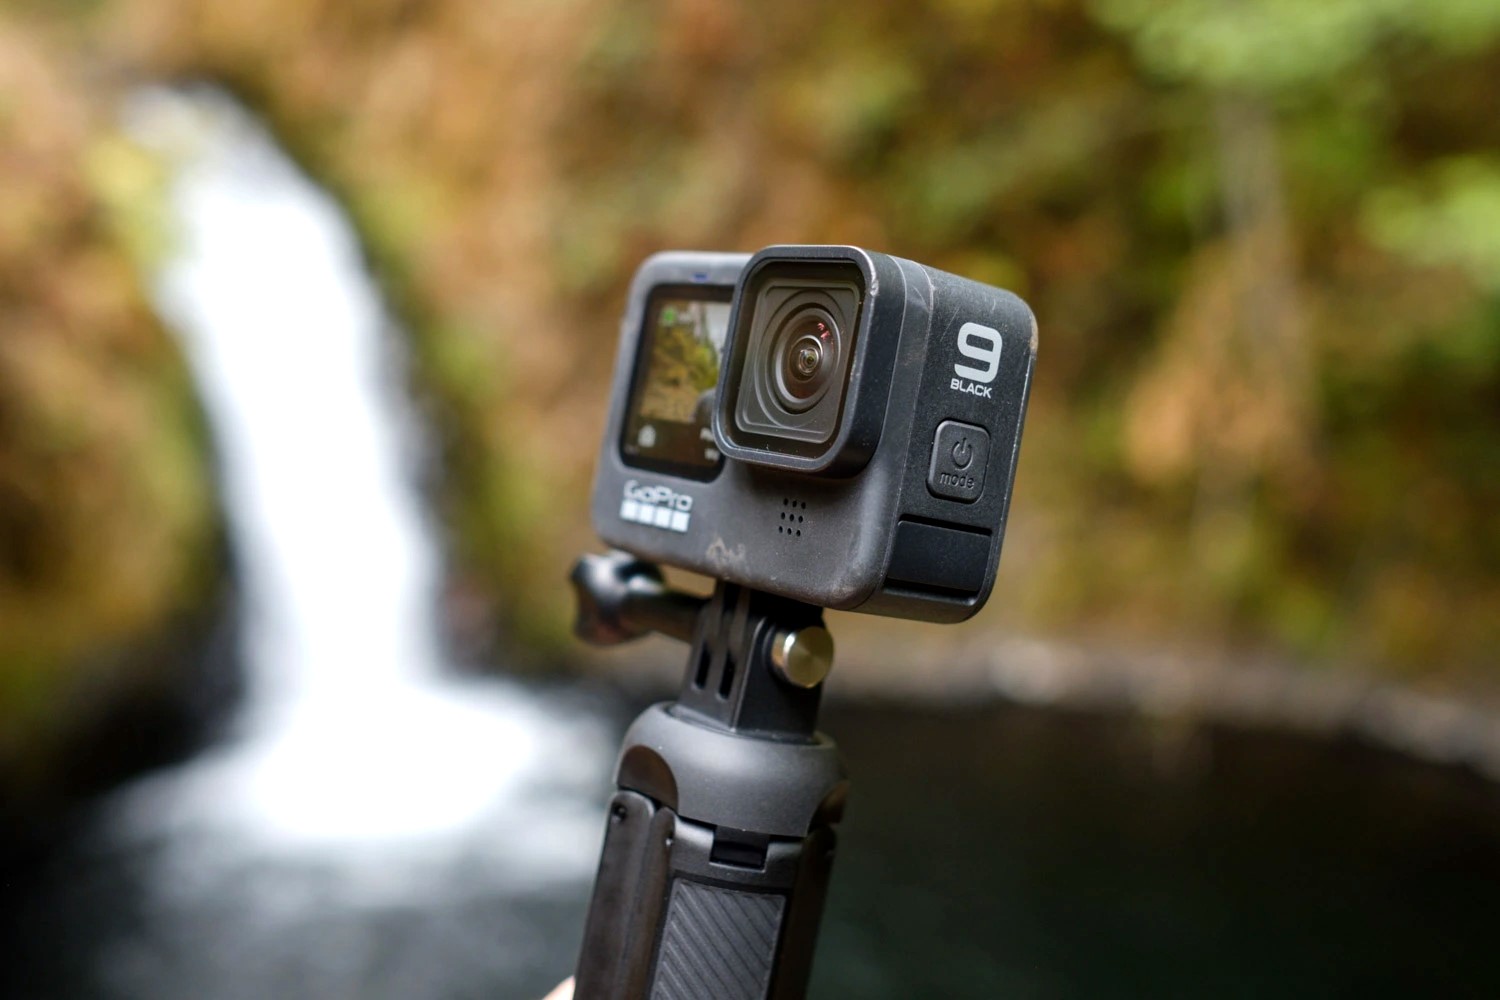 How to Purchase GoPro